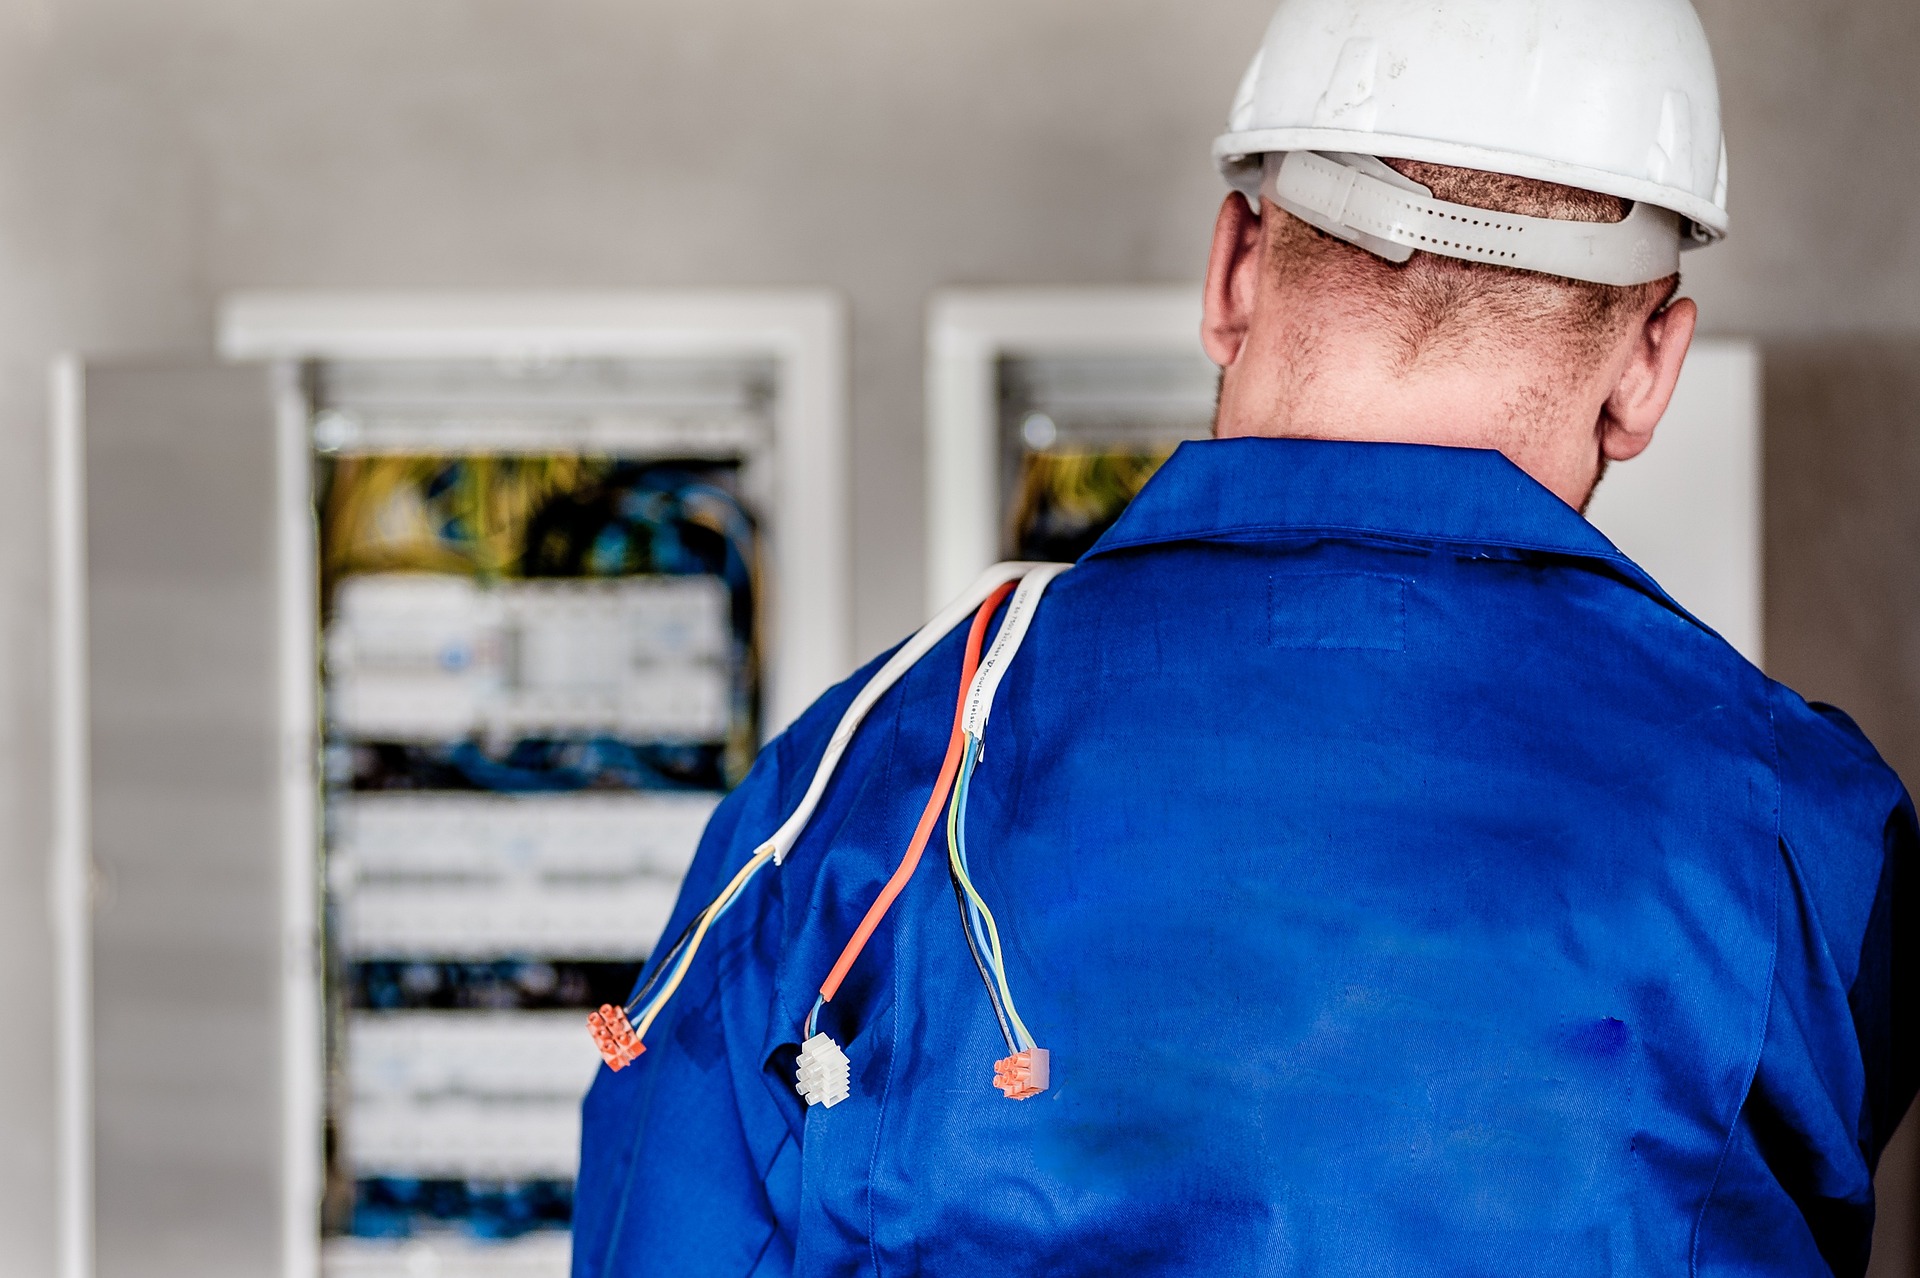 electrical inspections are important to keep employees and visitors safe